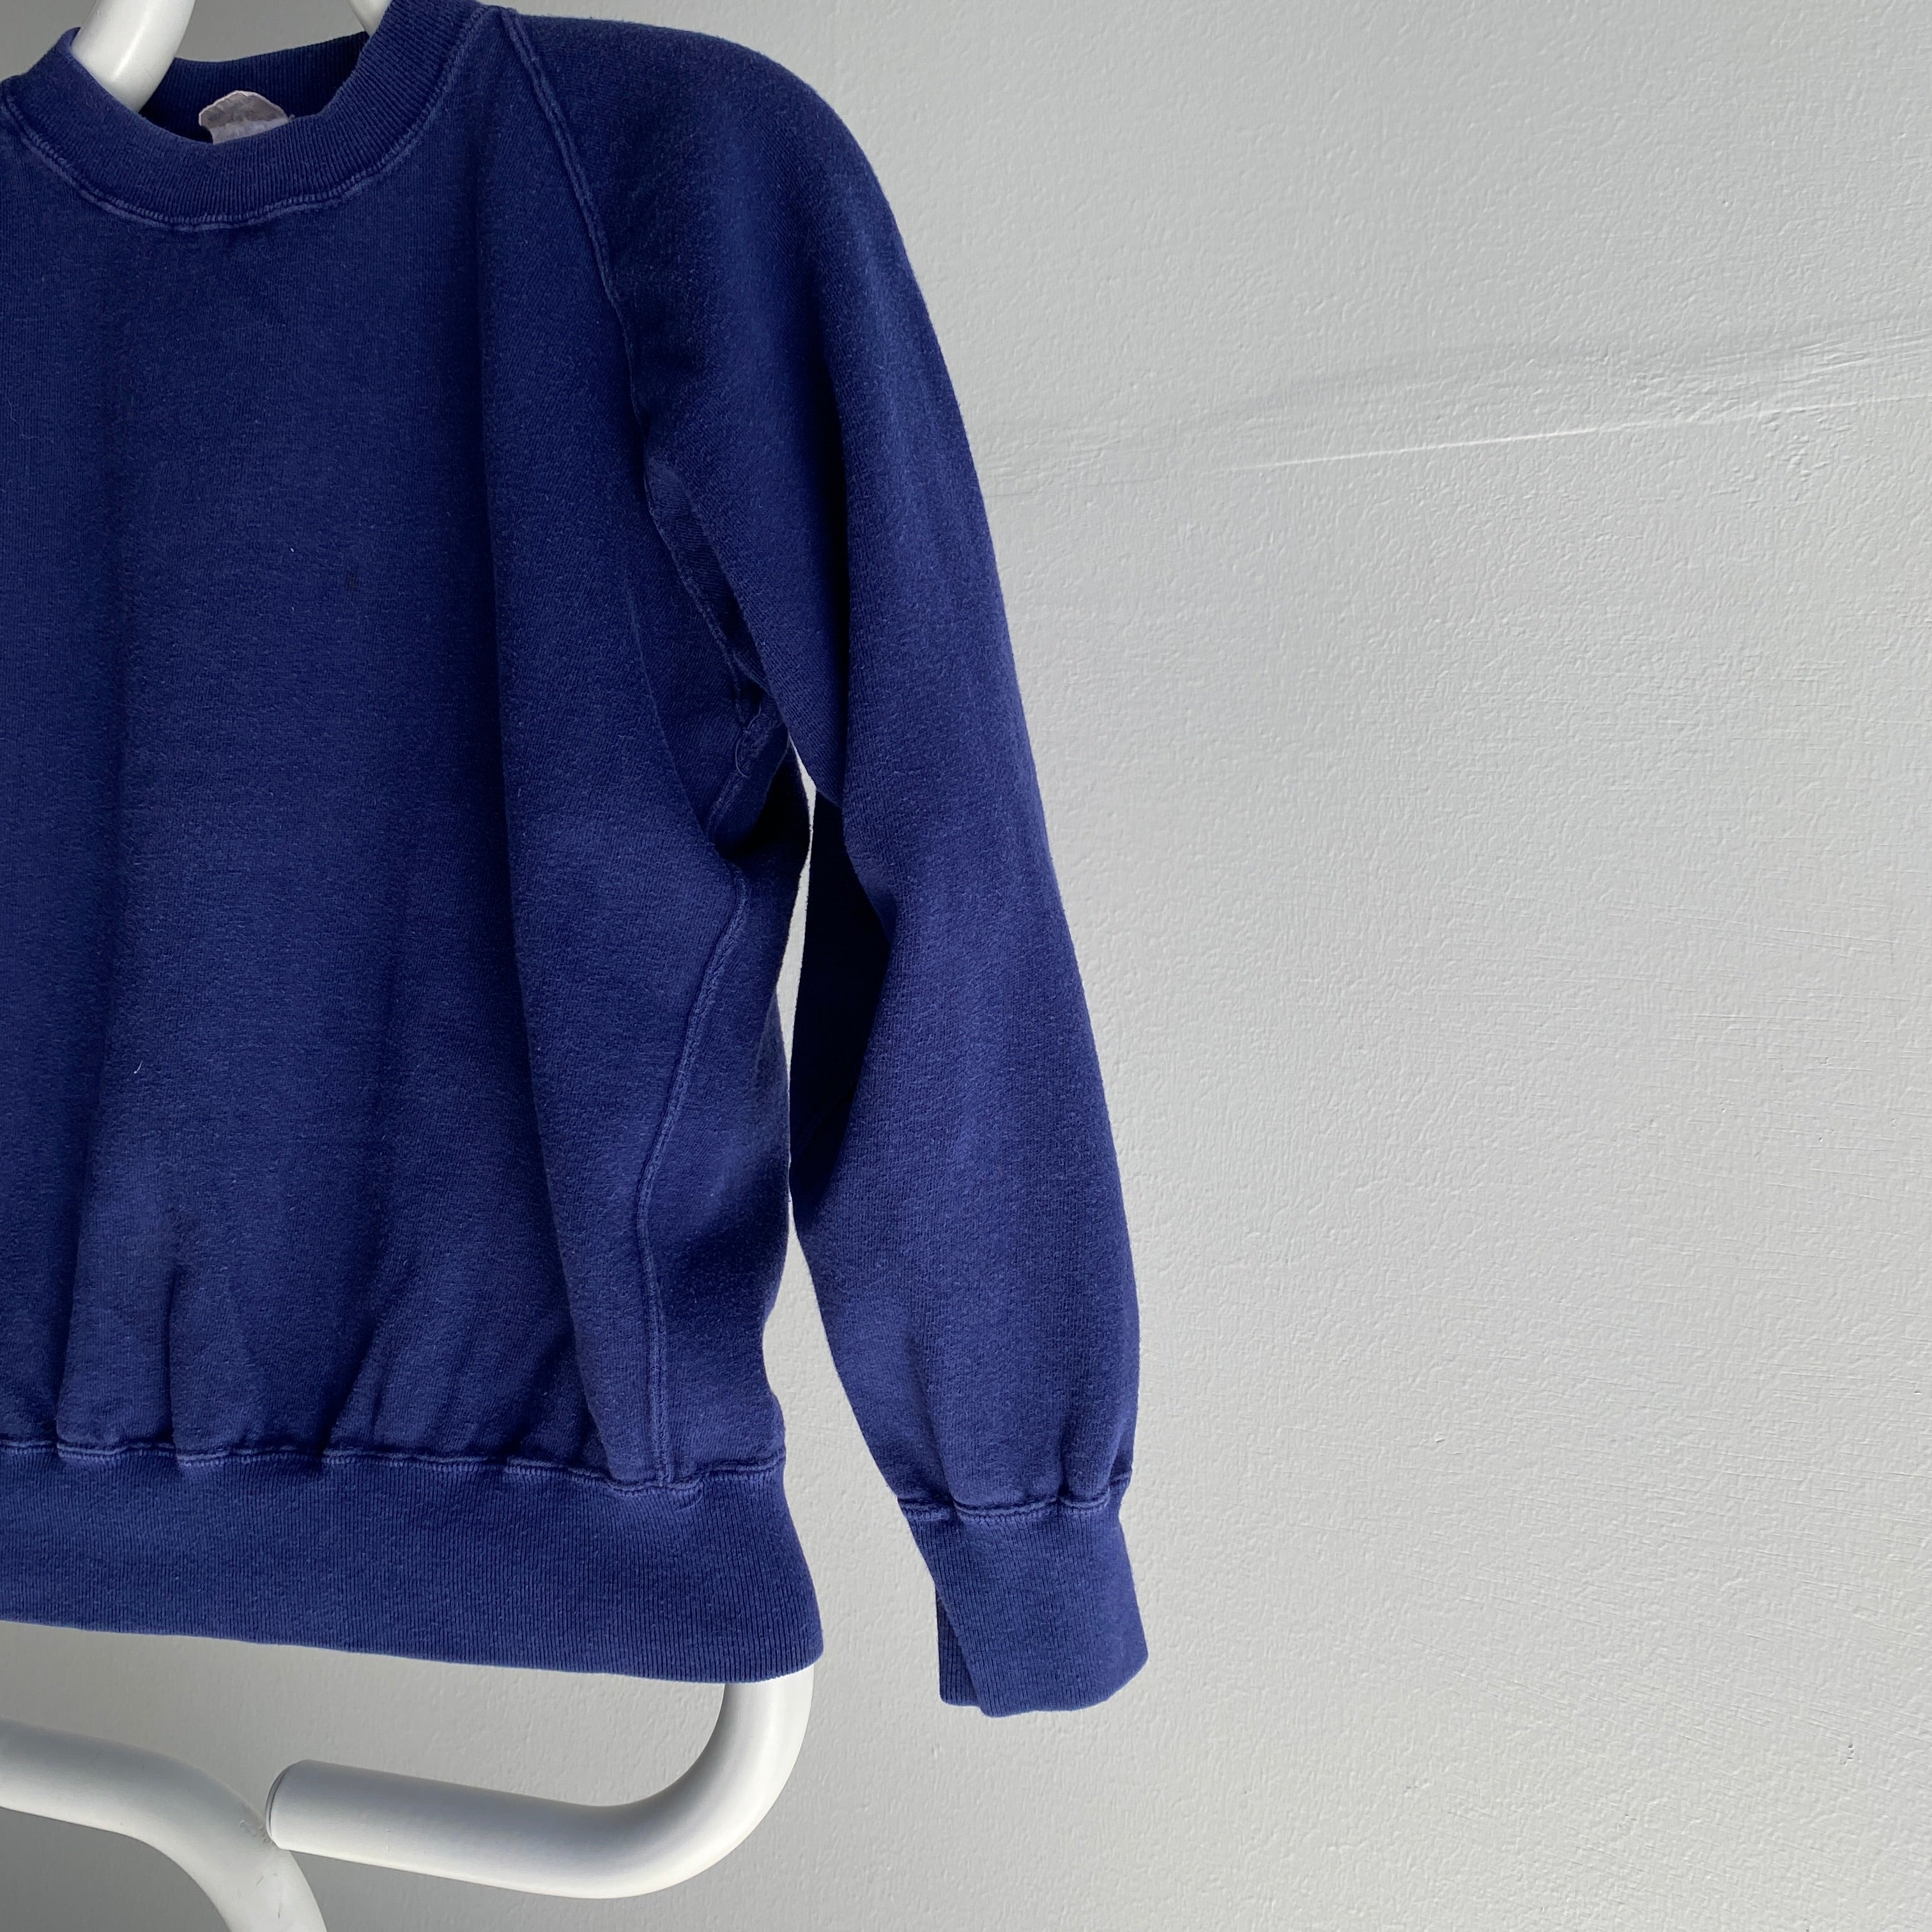 1980s Bright Navy Raglan - A Made-In-China Vintage